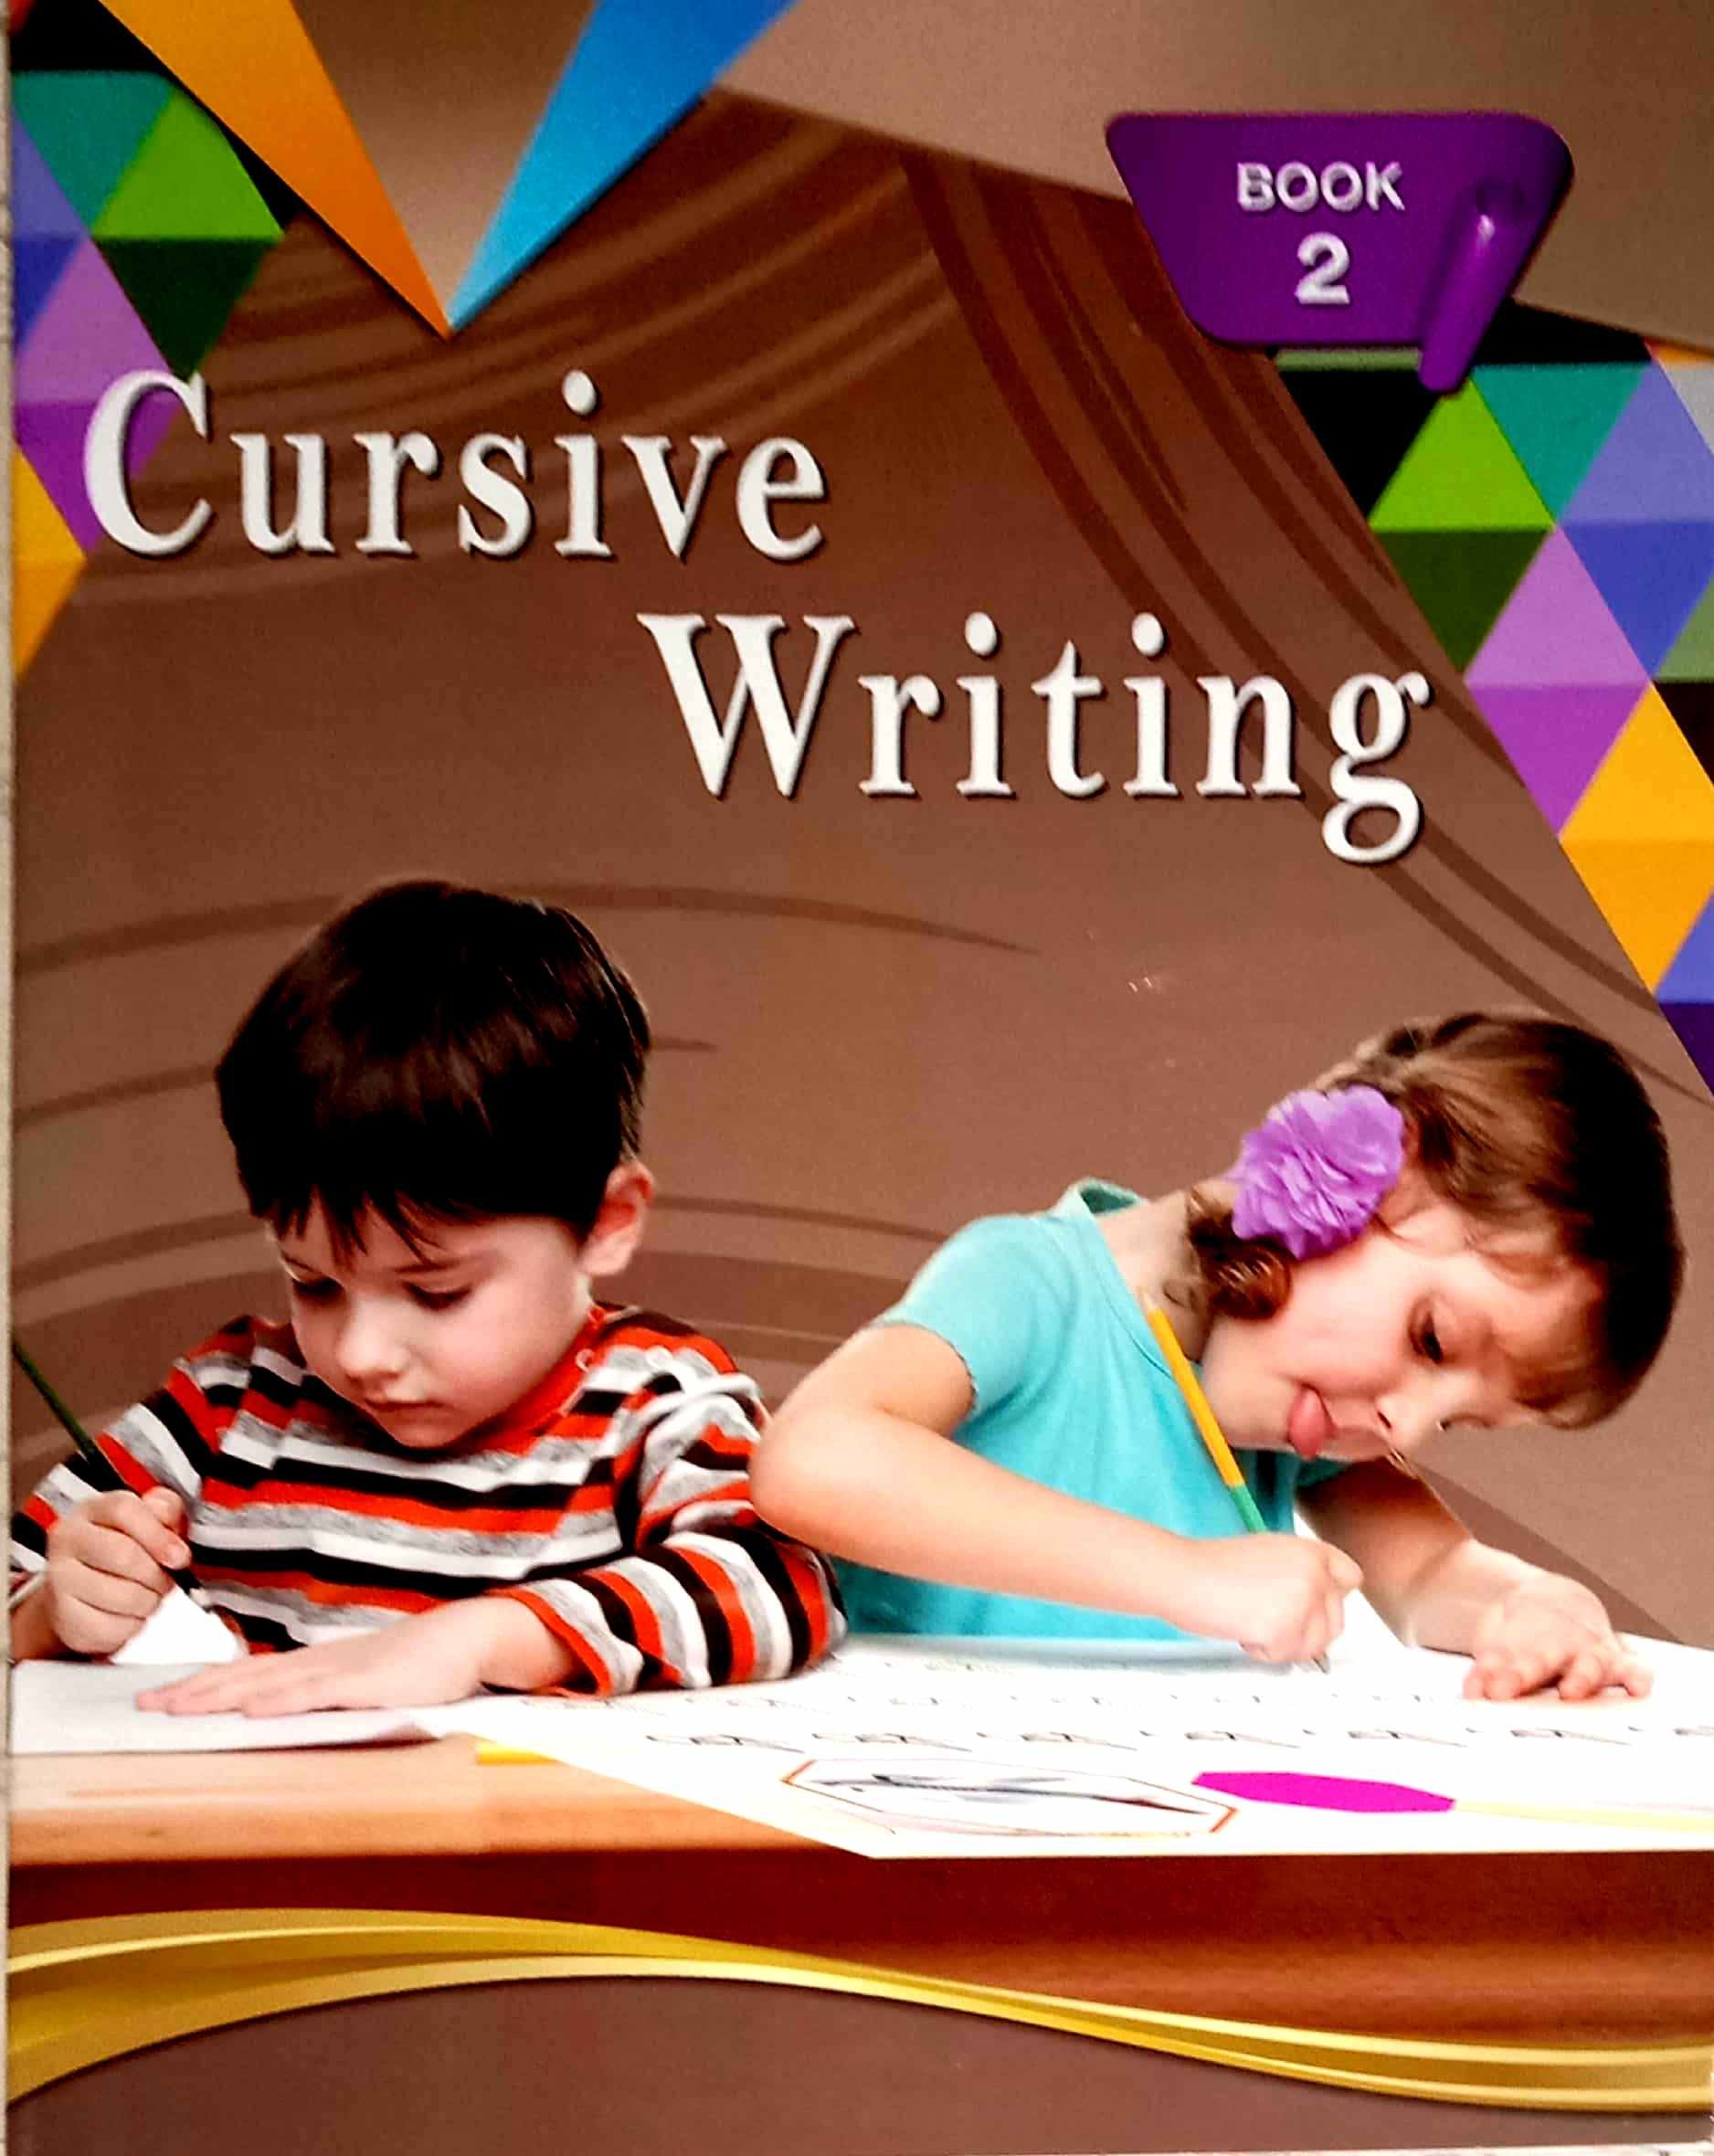 Routemybook - Buy Cursive Writing Book 2 by Happy Books Editorial Board ...